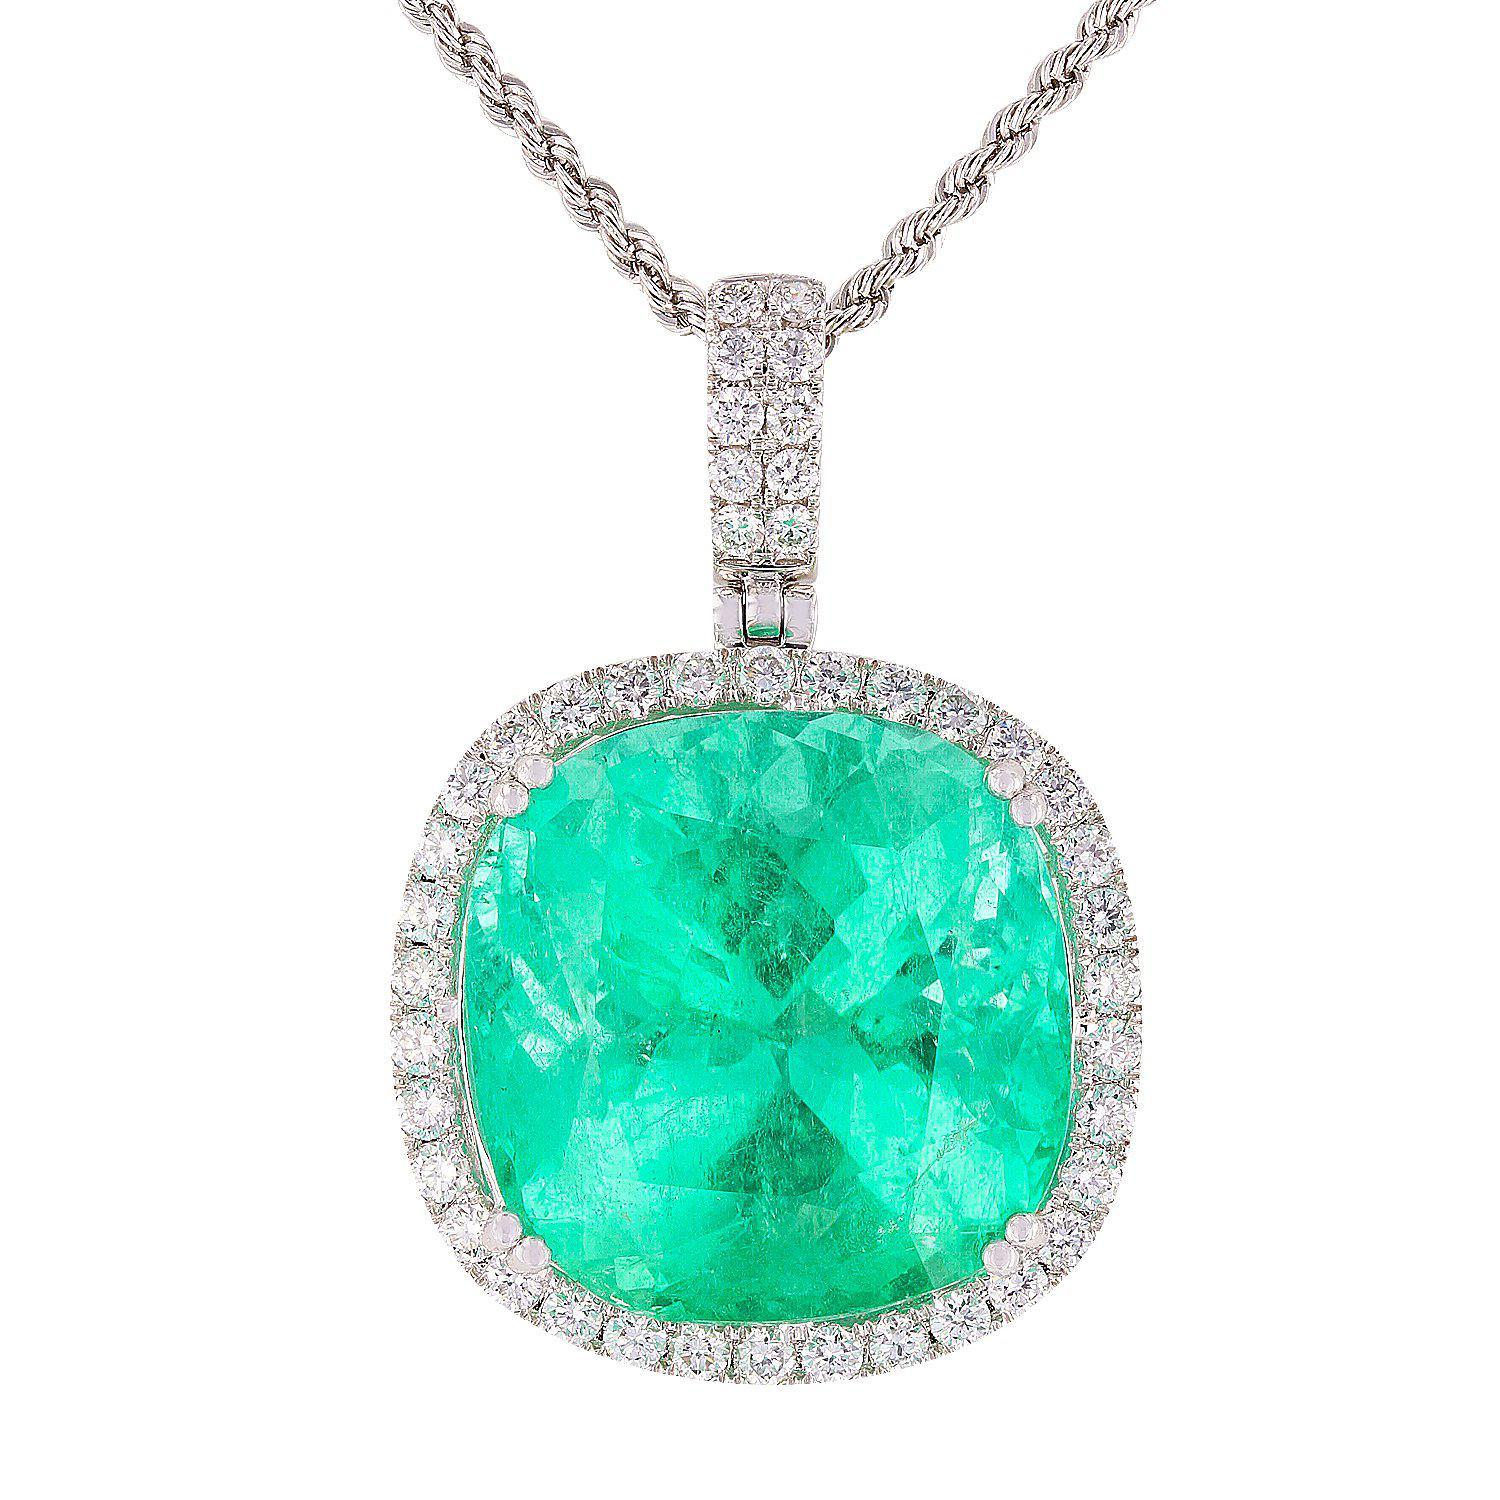 GIA Certified 24.81 Carat Emerald Pendant Necklace For Sale